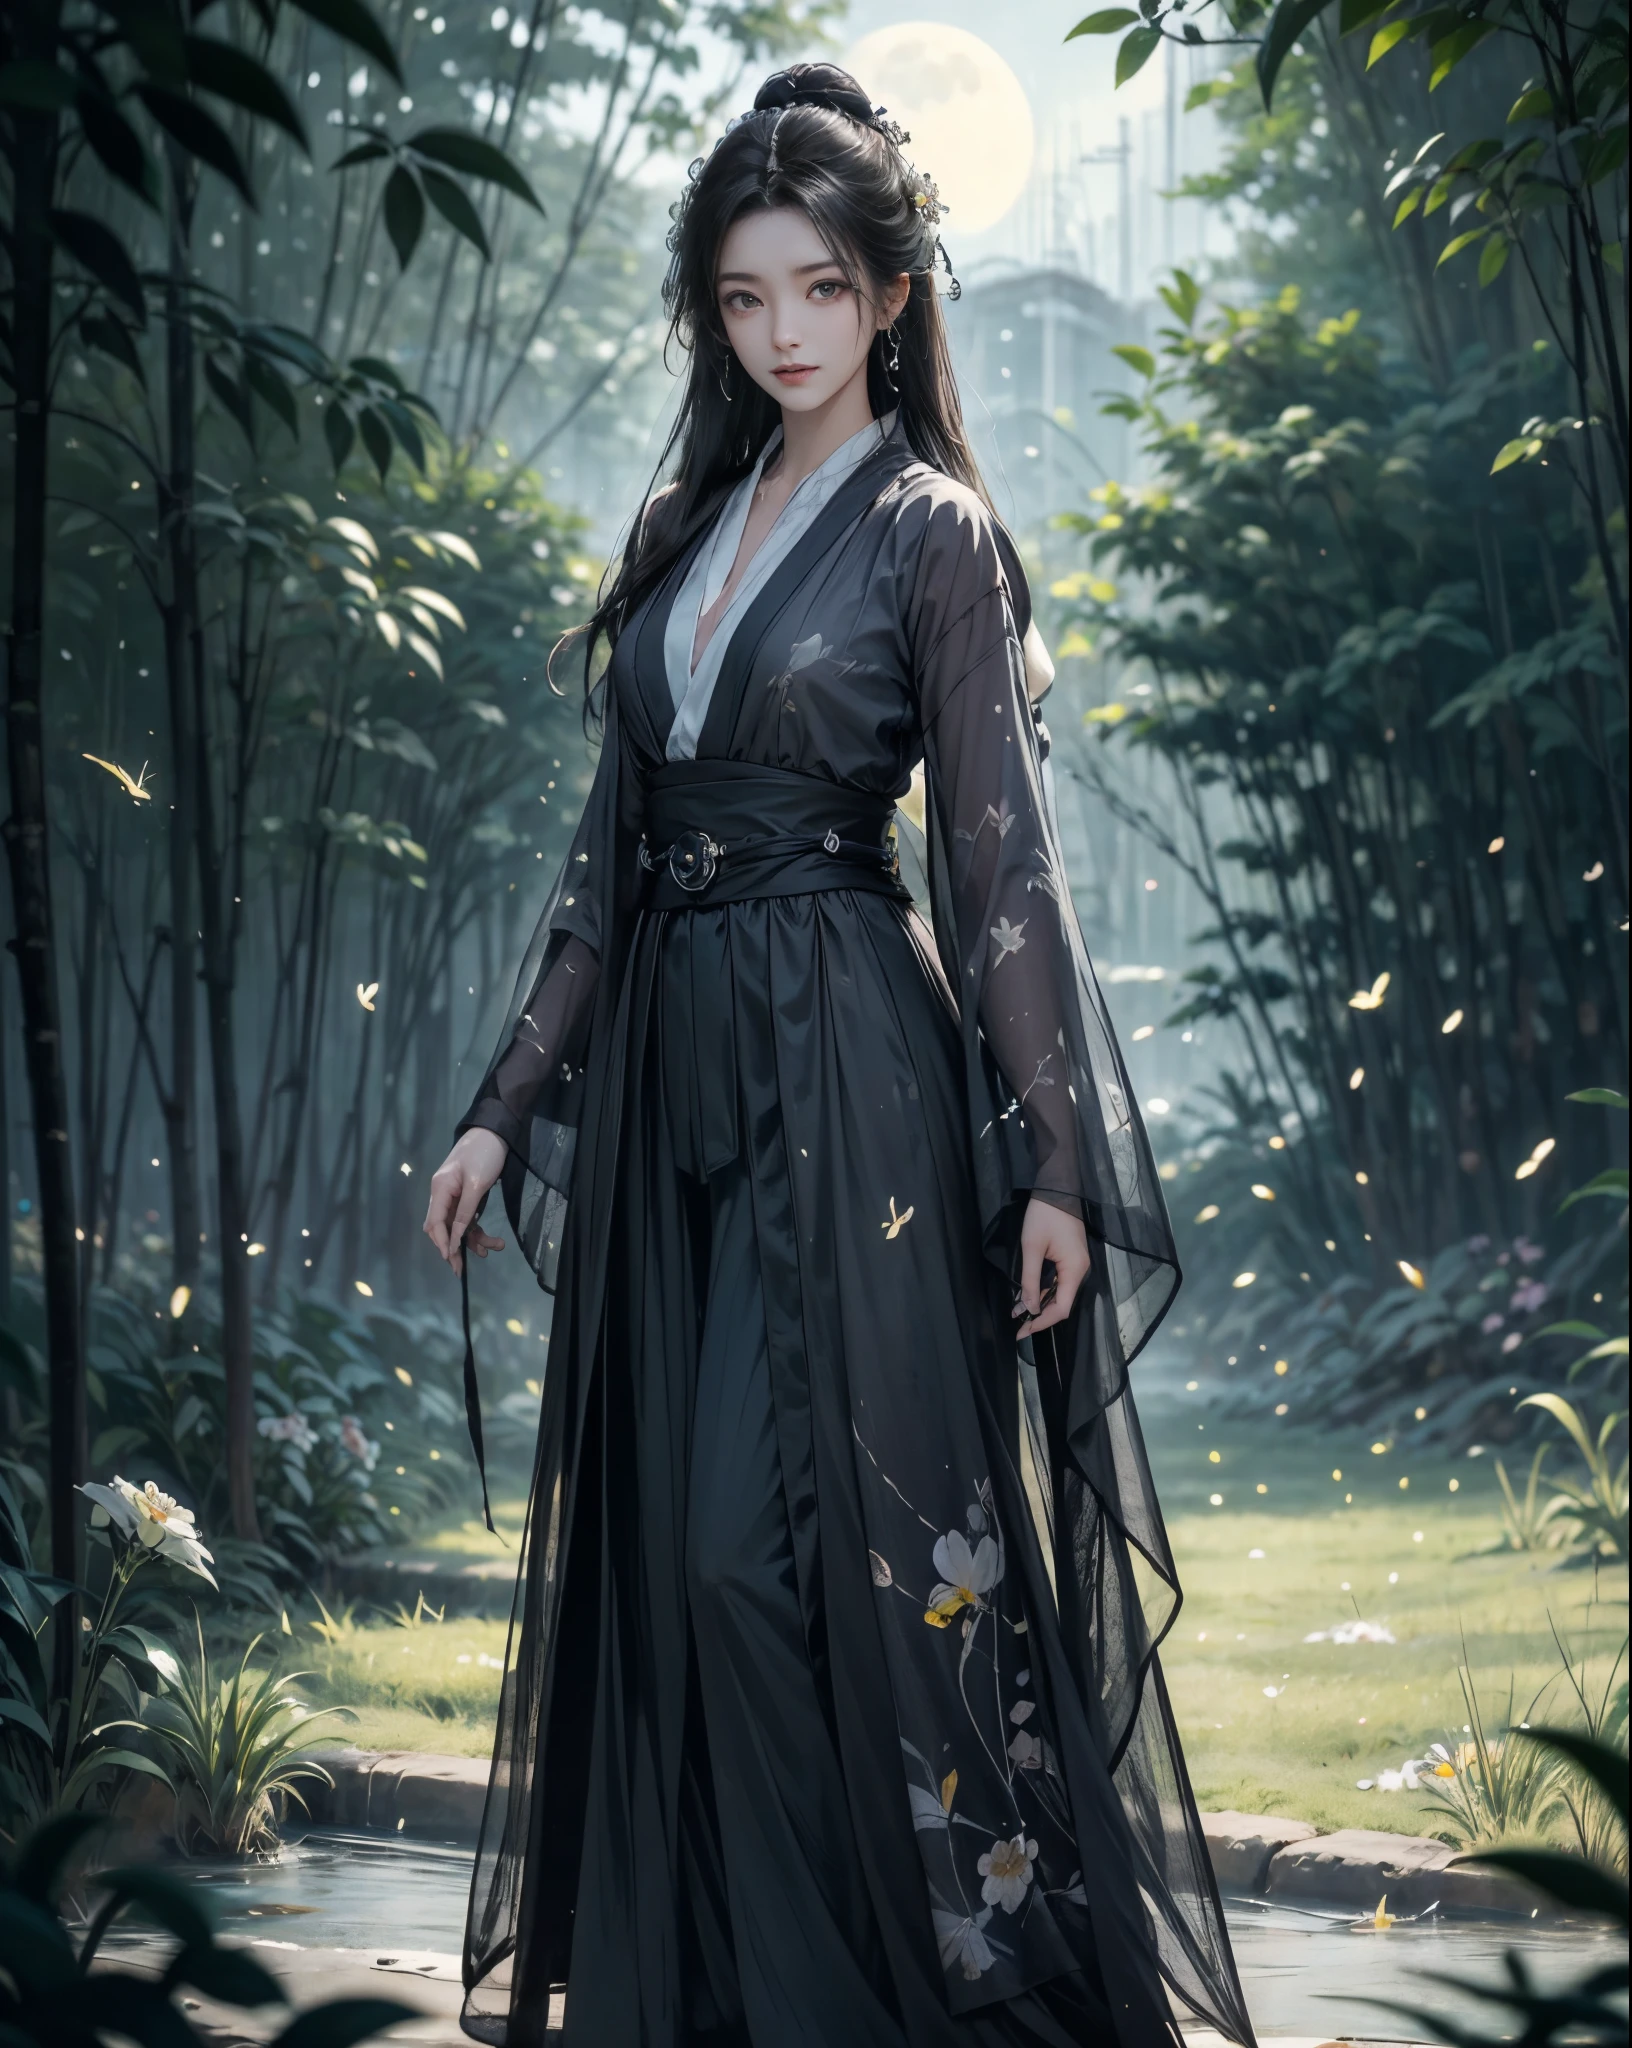 Medium breast, A girl standing against a background of moonlight and a sea of flowerore elegant and dusty，a person々Let yourself be immersed in this beautiful picture。Her every move is like a beautiful dance.，As if melting into this sea of flowers，Expressing the beauty of ancient style, fireflies